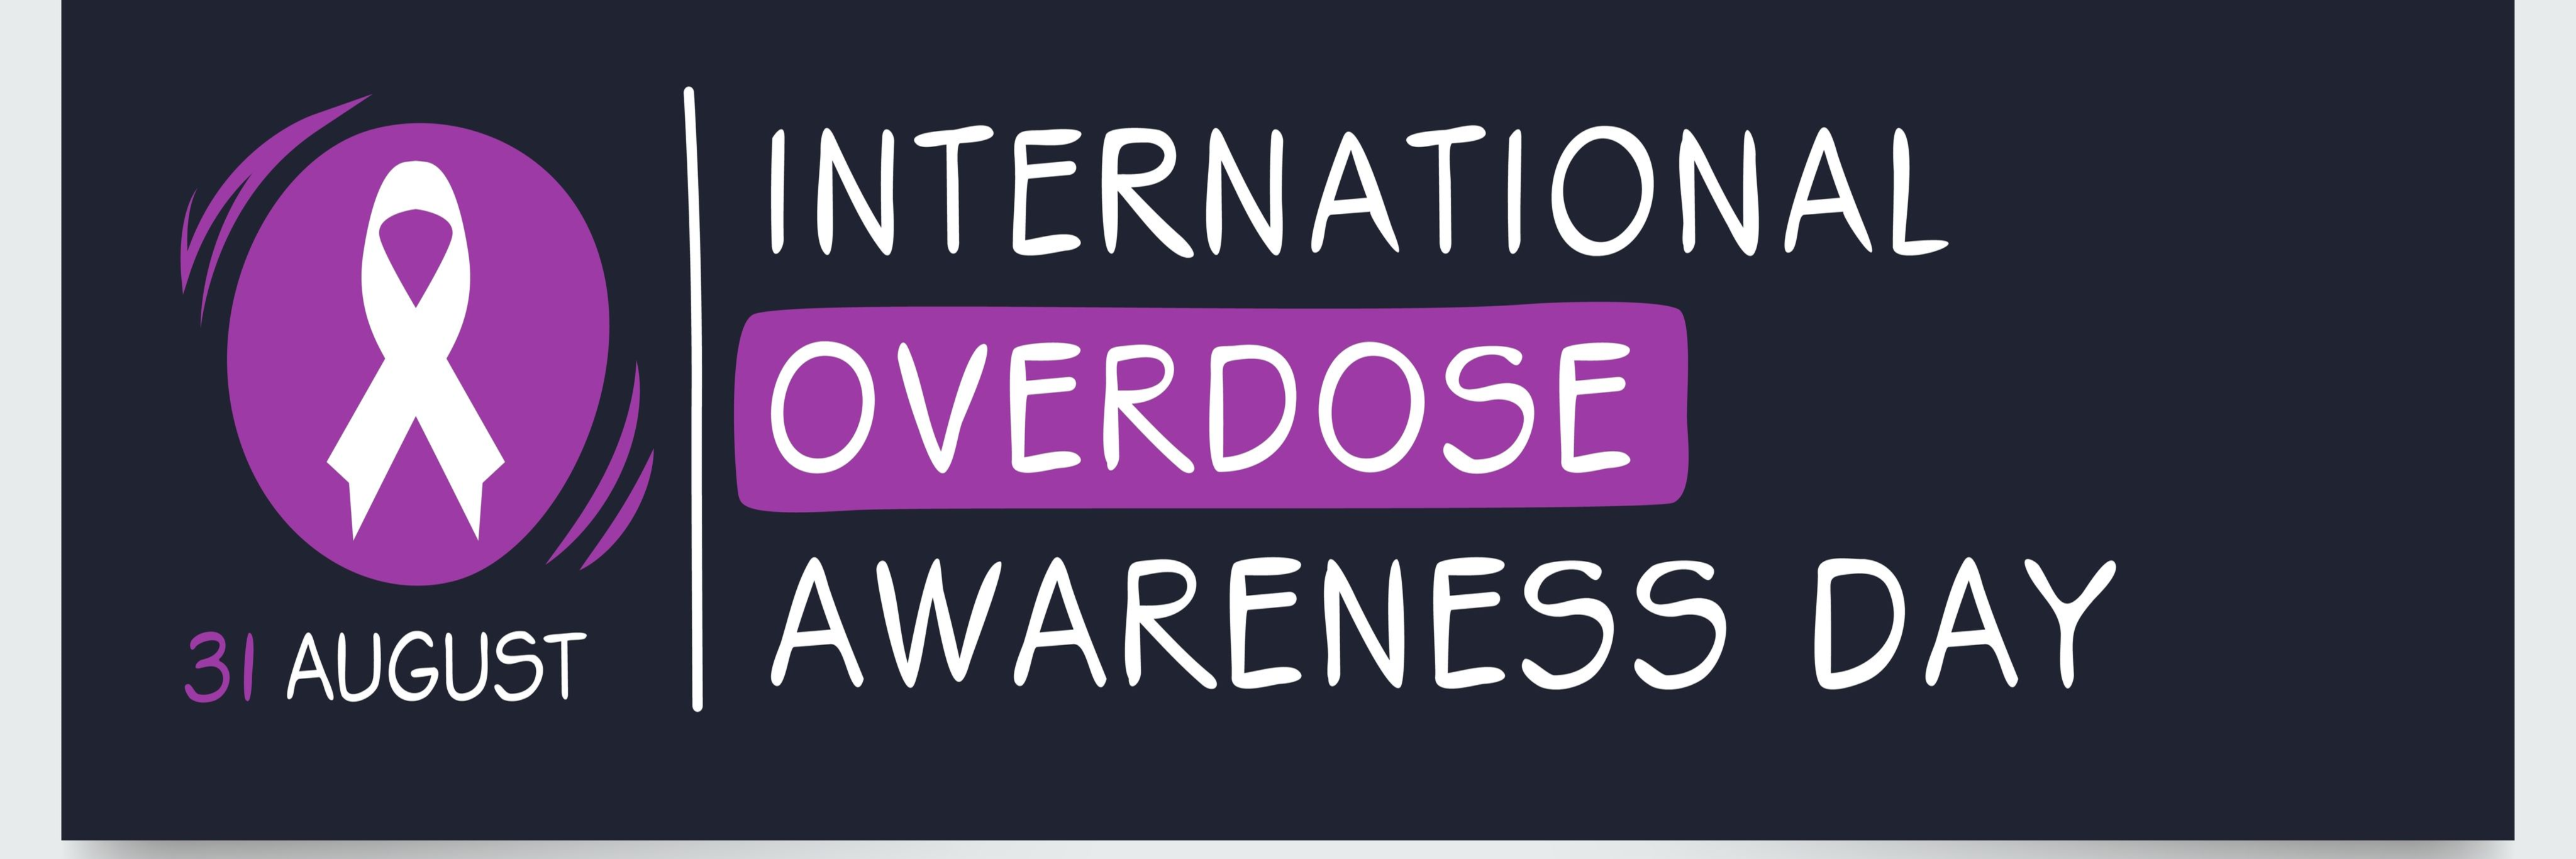 August 31 is International Overdose Awareness Day